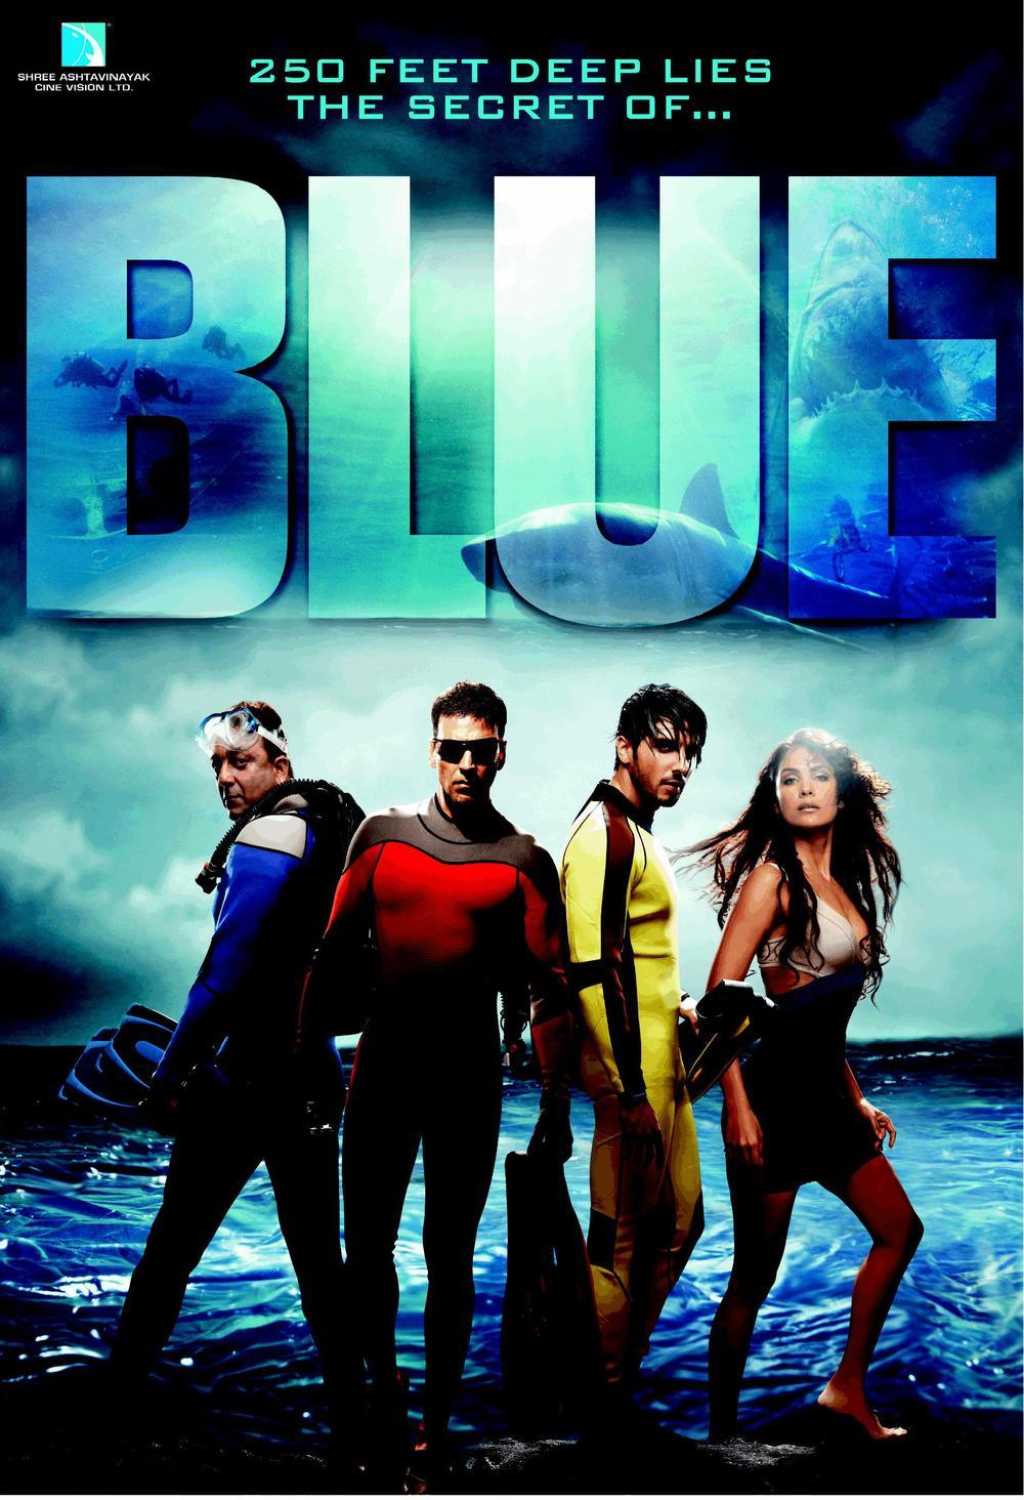 blue bollywood movie review